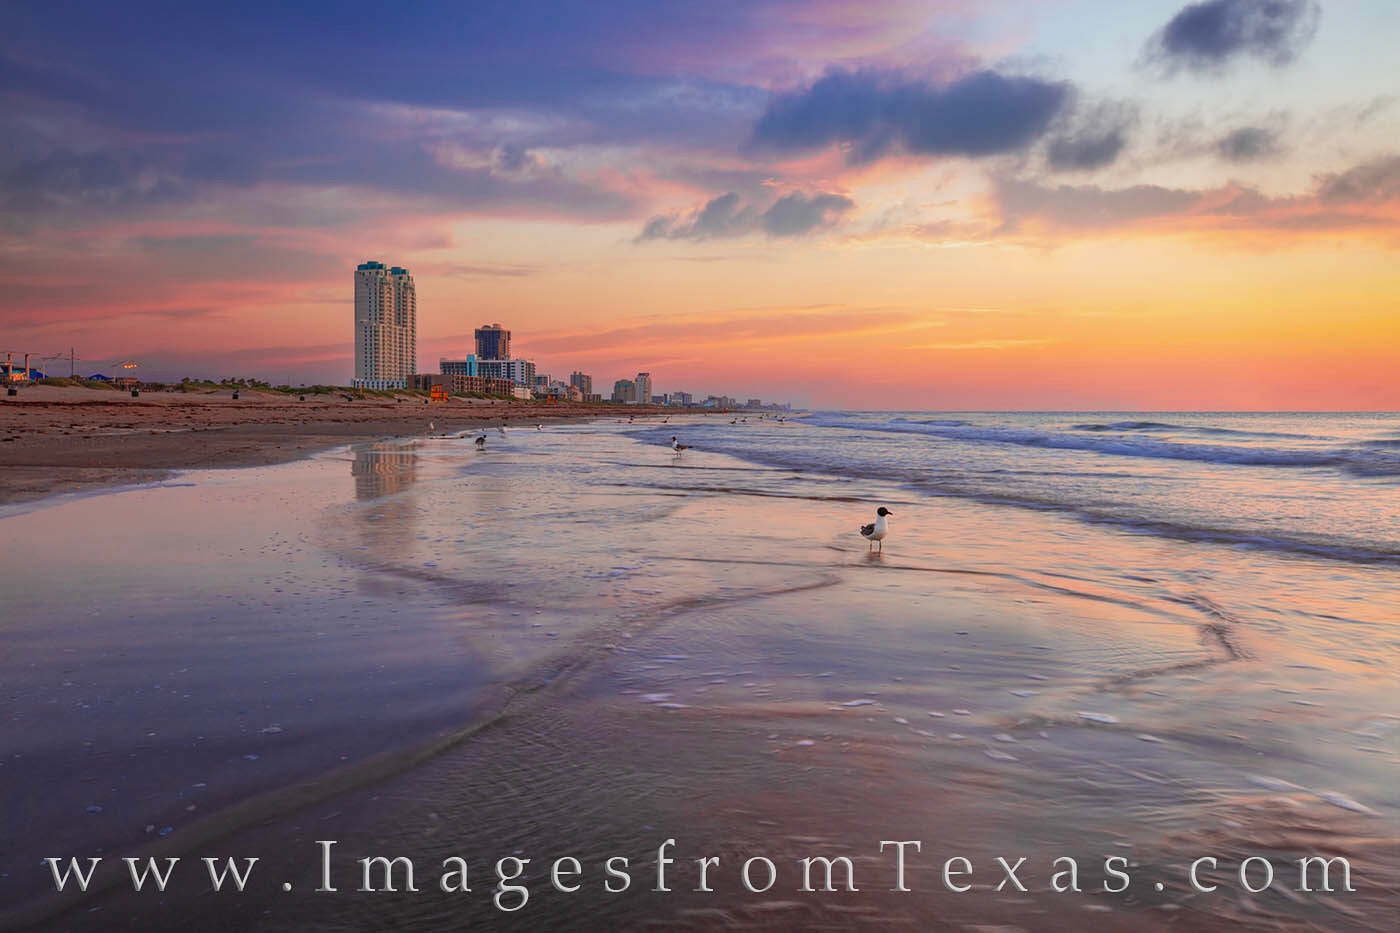 The skyline from South Padre is reflected on the beach in this morning photograph. I had gulls watching me and clouds moving...